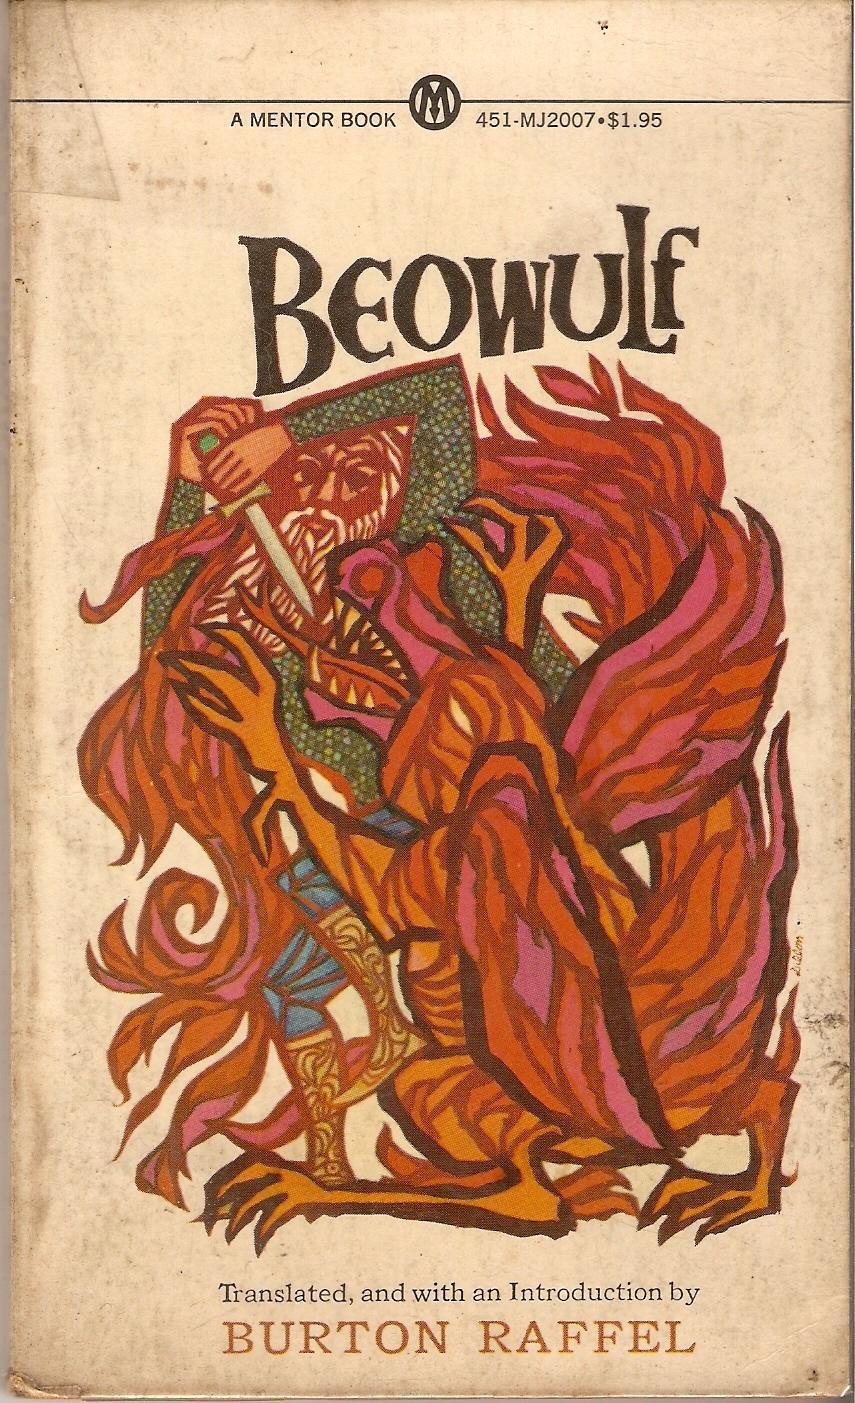 The Center Piece Work Beowulf as an introduction to the duality of life and the relativity of